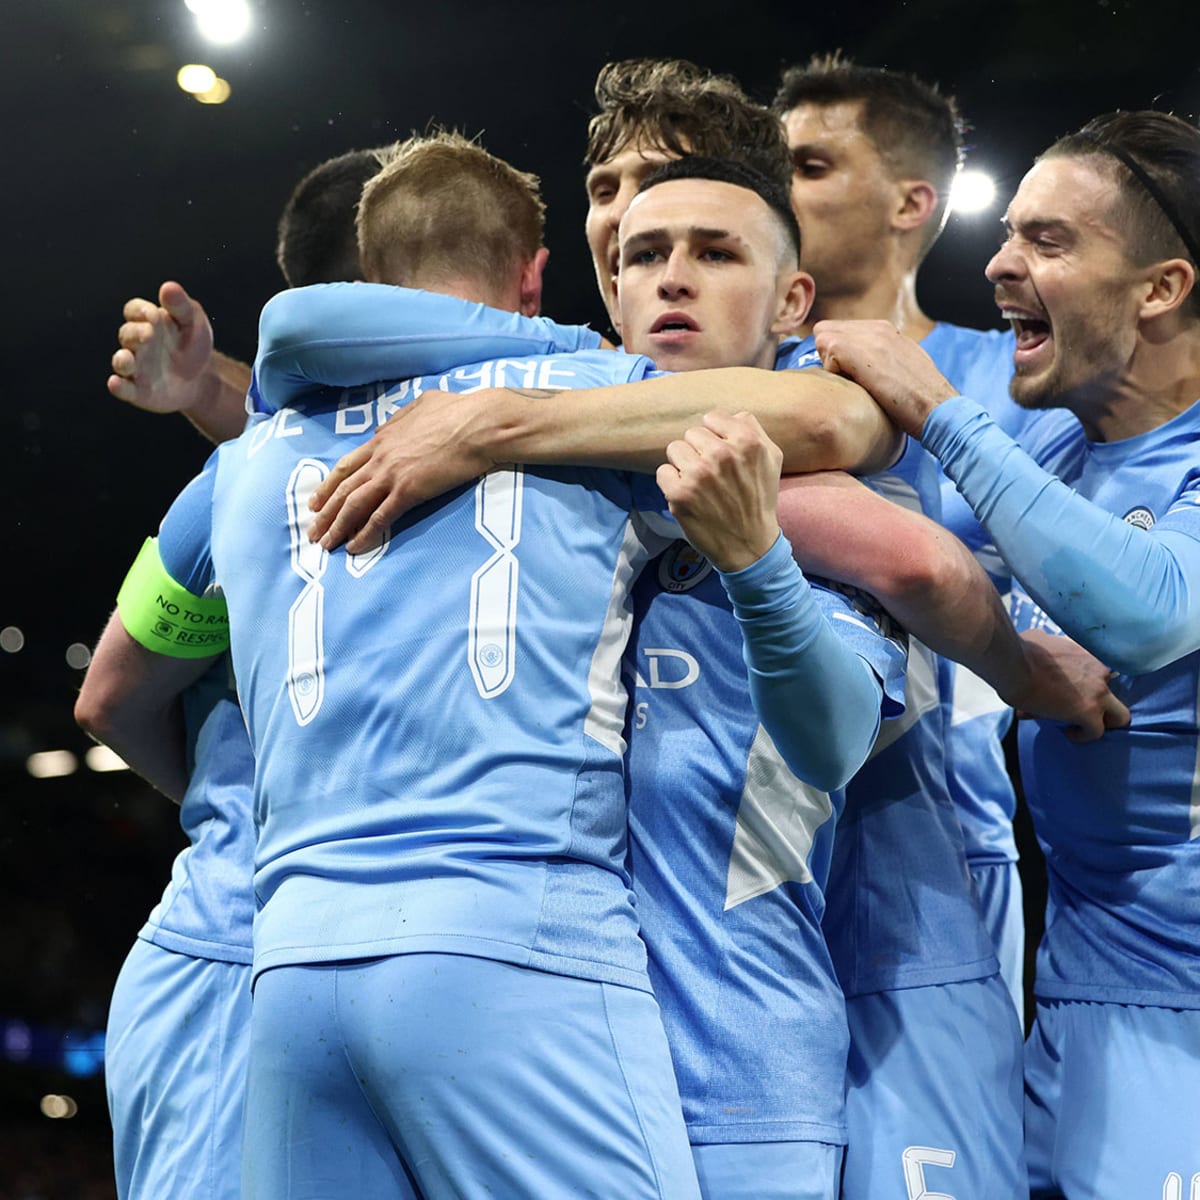 Man City clinches 6th Premier League soccer title in 11 seasons